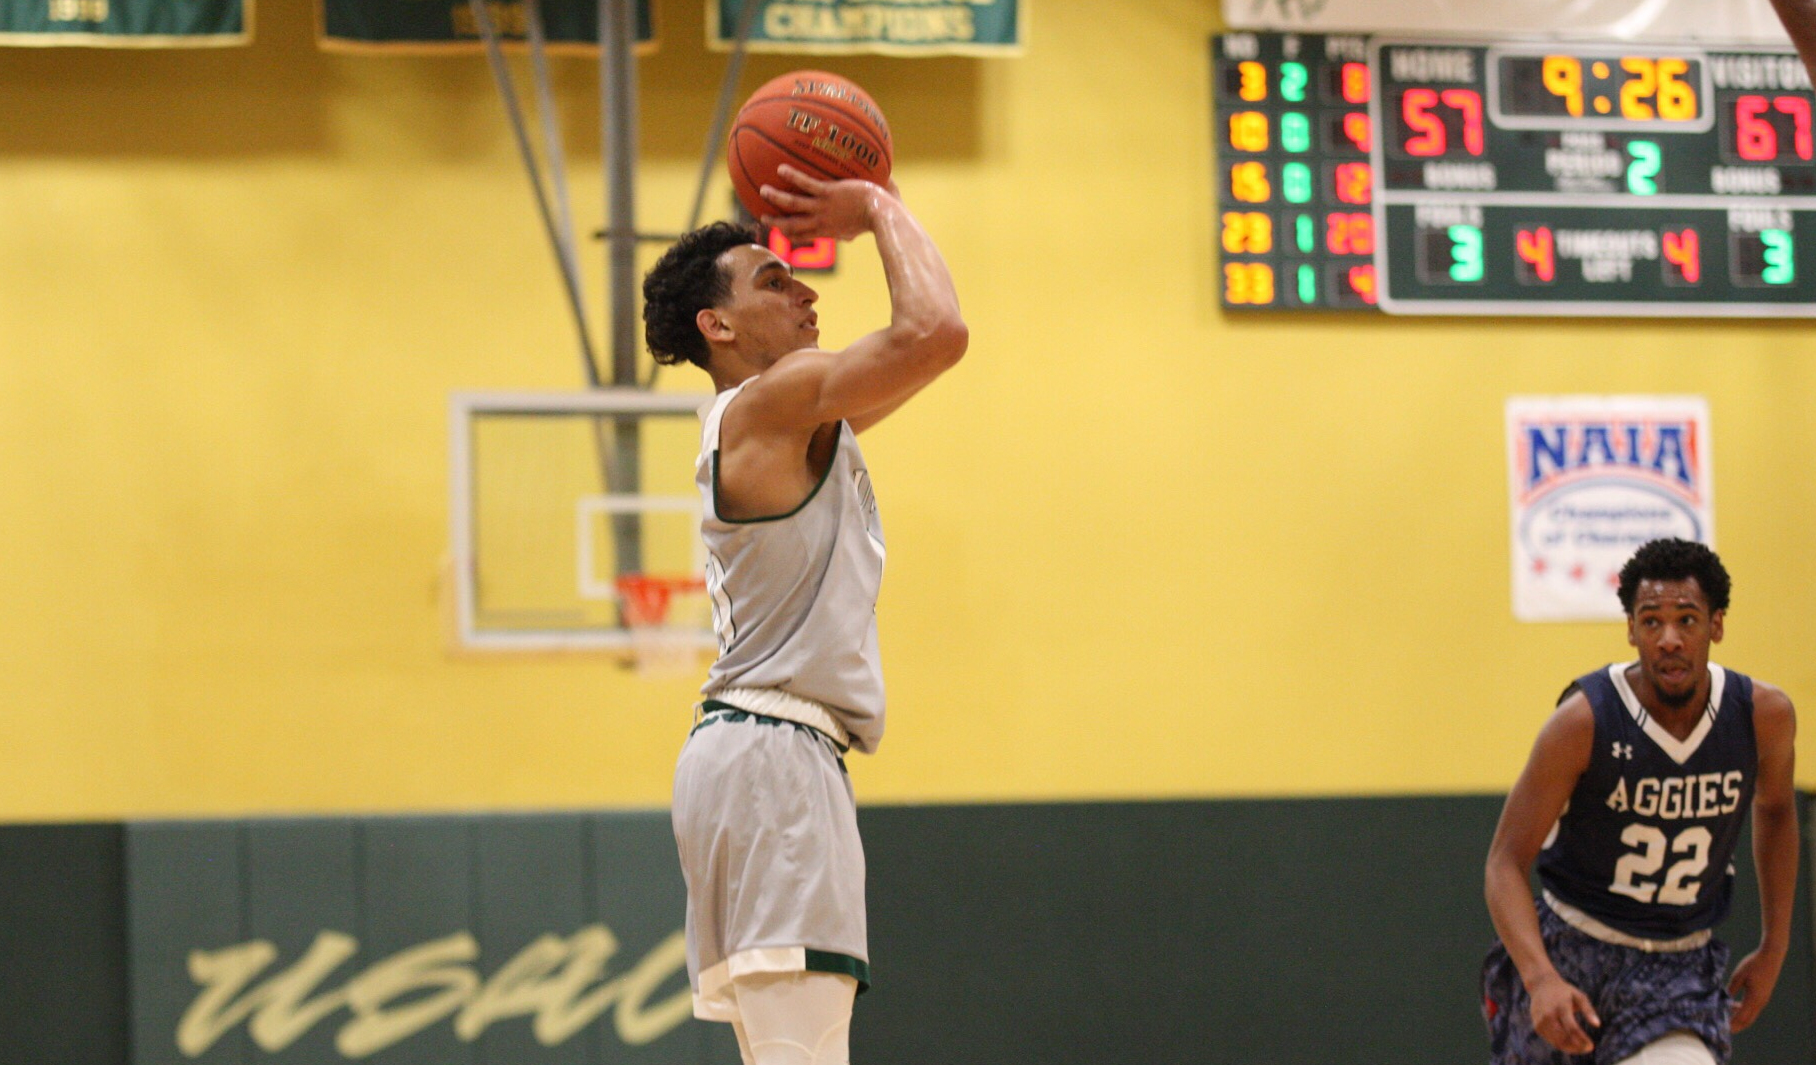 USAO’s Stephon Hall (Mvskoke Creek) Scores Career-High 20 Points in 83-84 loss to Oklahoma Panhandle State University